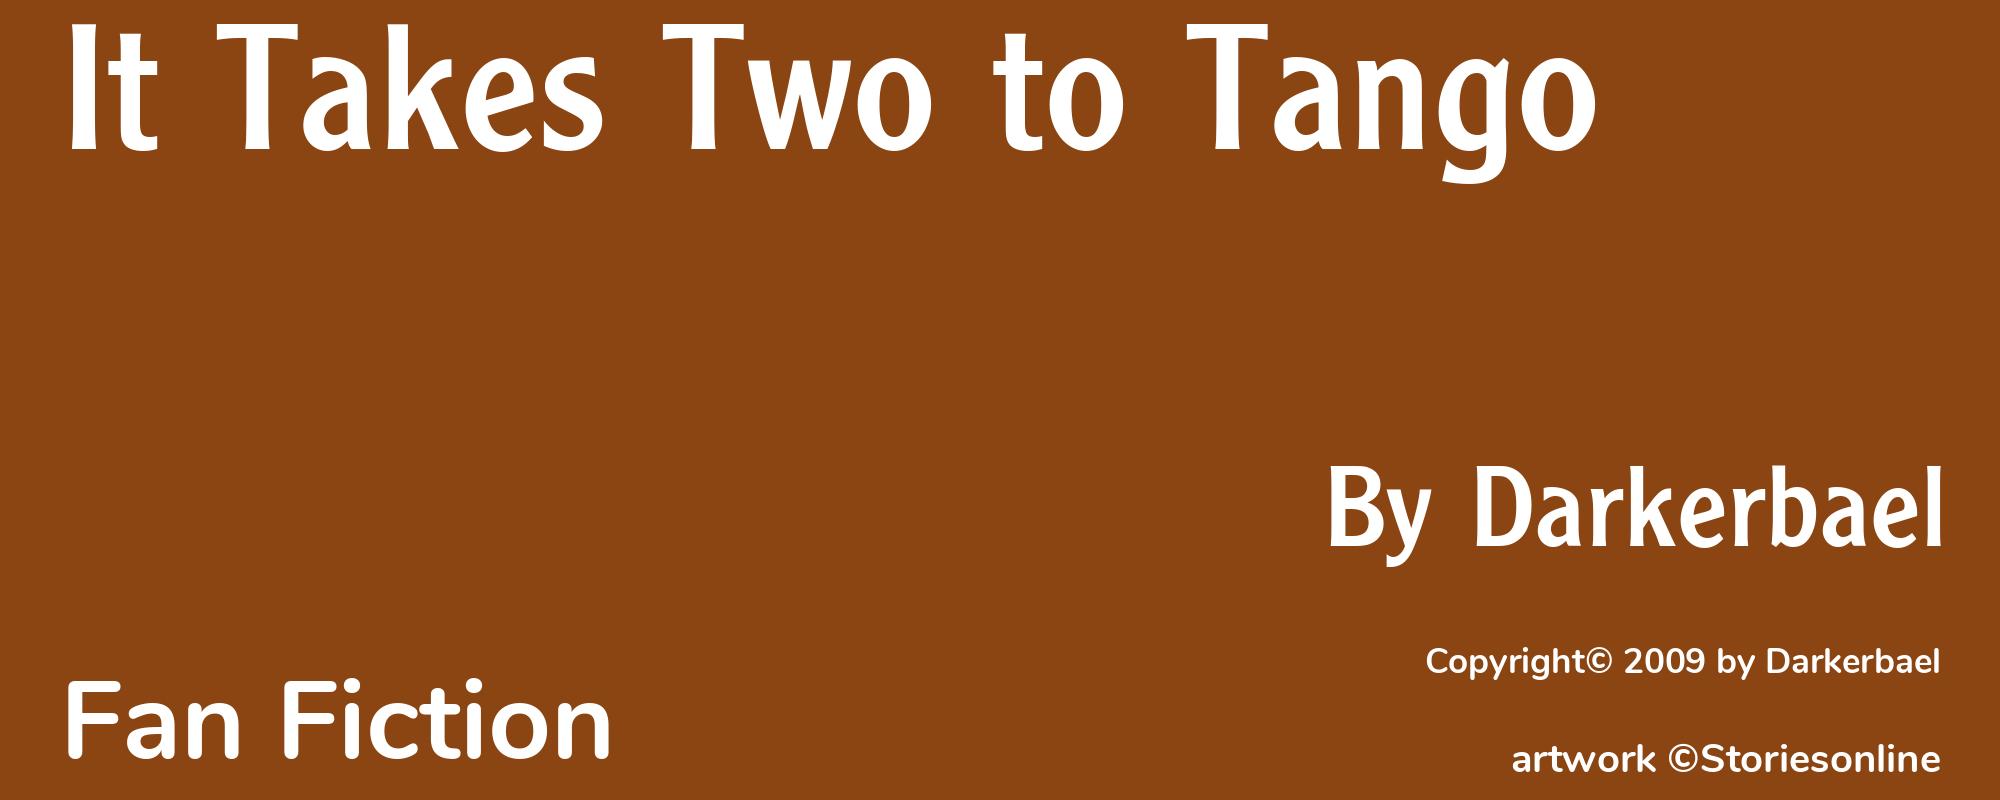 It Takes Two to Tango - Cover